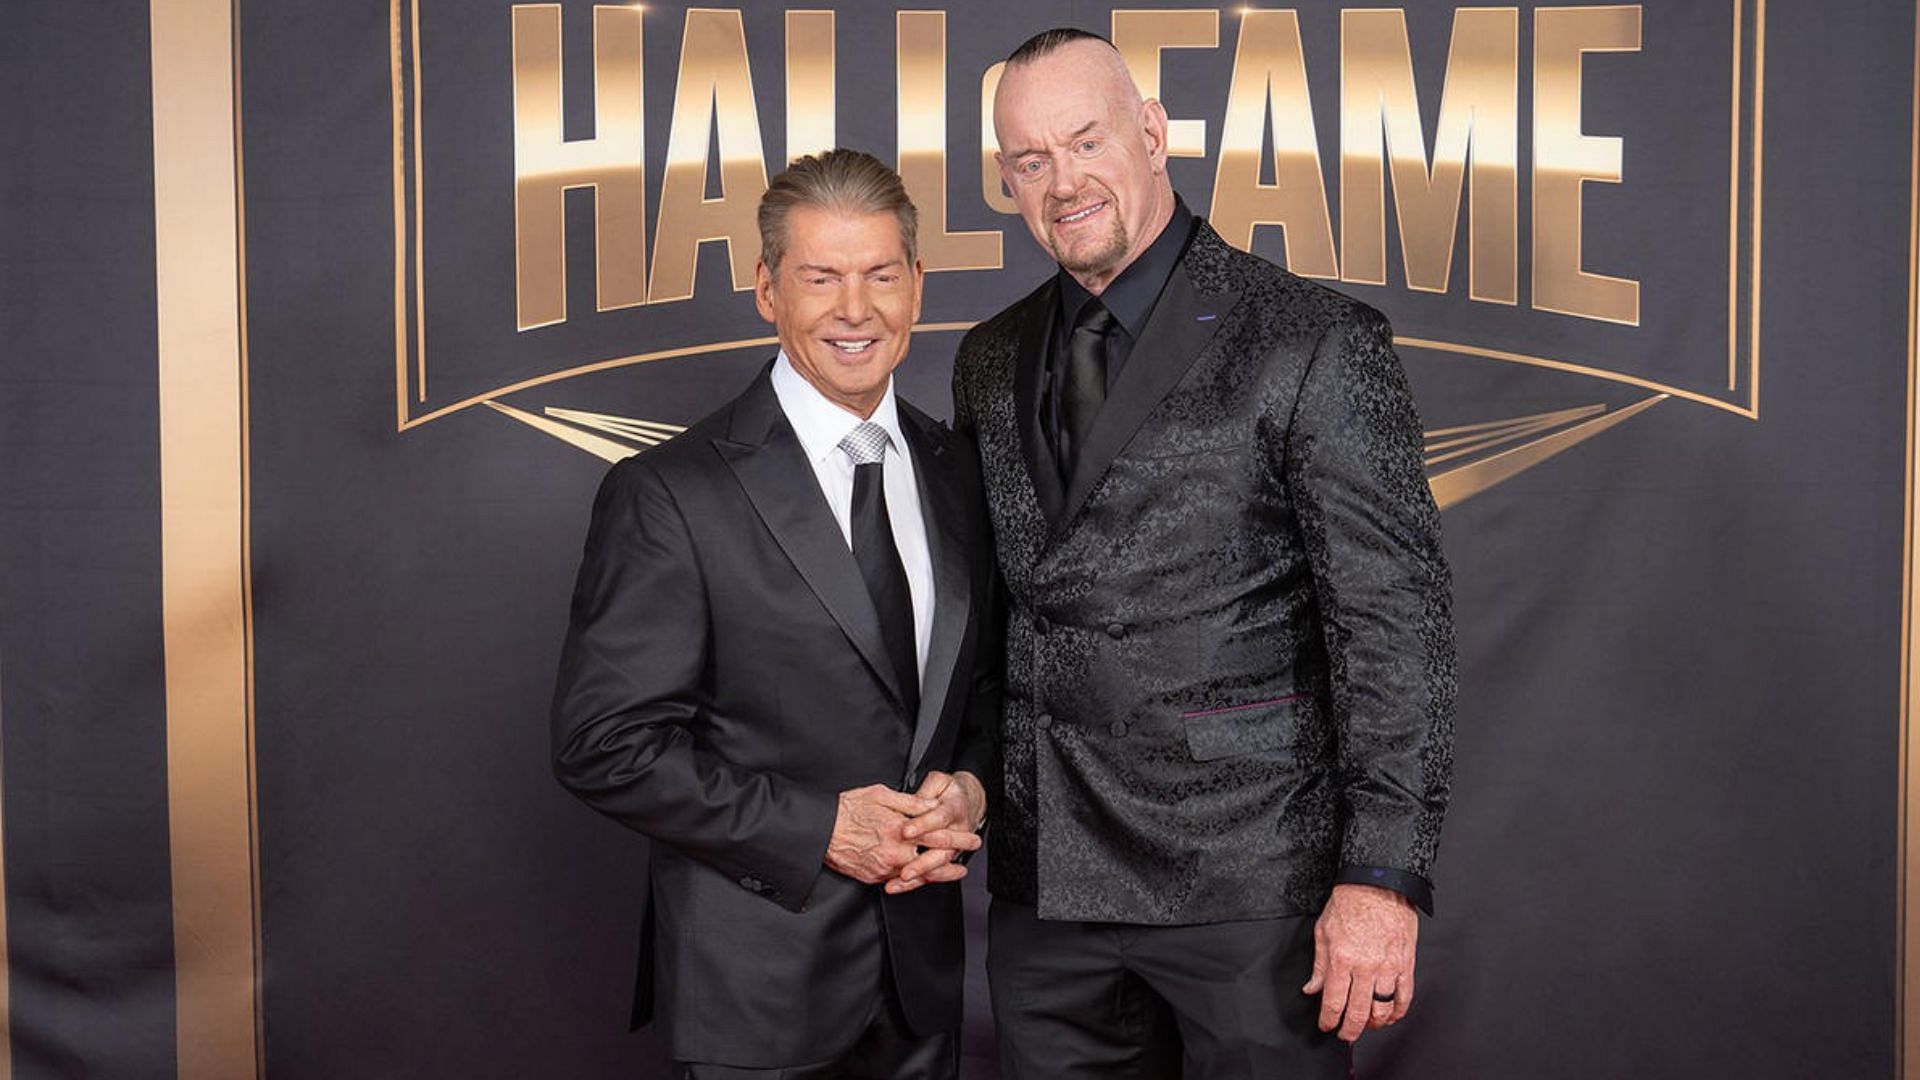 The Undertaker with Vince McMahon at WWE Hall of Fame 2022!